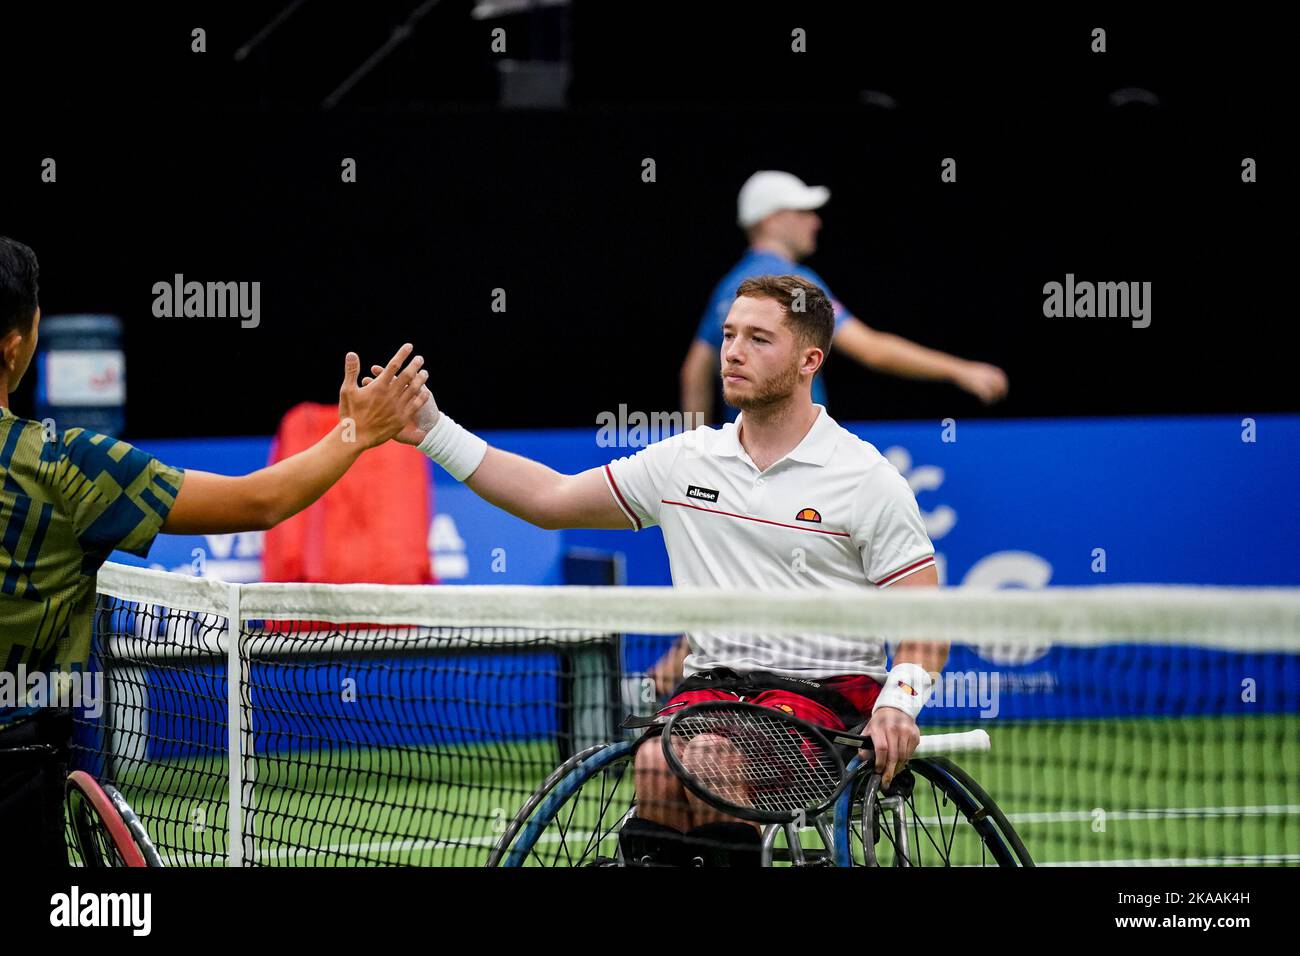 OSS, NETHERLANDS - NOVEMBER 1: Alfie Hewett of Great Britain after his men's singles match against Tokito Oda of Japan during Day 3 of the 2022 ITF Wheelchair Tennis Masters at Sportcentrum de Rusheuvel on November 1, 2022 in Oss, Netherlands (Photo by Rene Nijhuis/Orange Pictures) Stock Photo